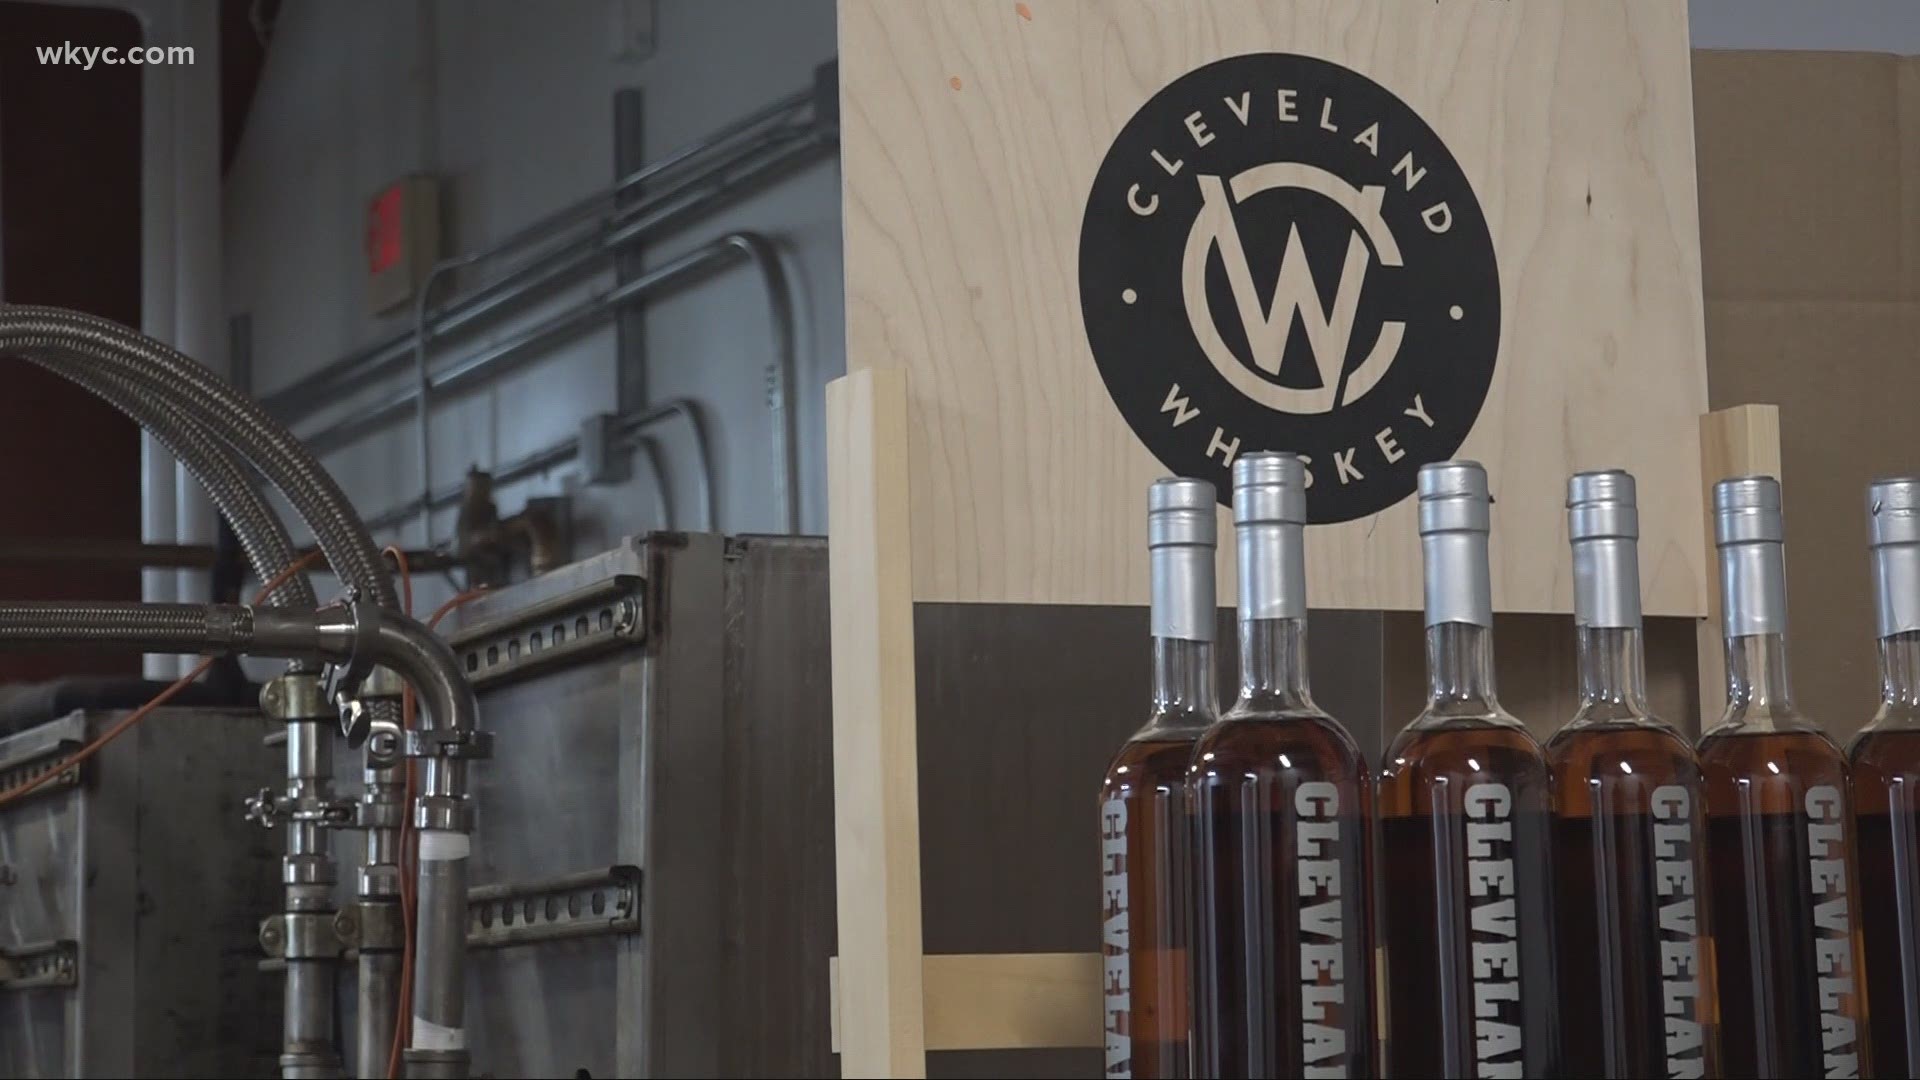 Cleveland Whiskey is renovating an old fruit and action building and using whiskey bonds to help finance it. This week, they got approval to move forward.